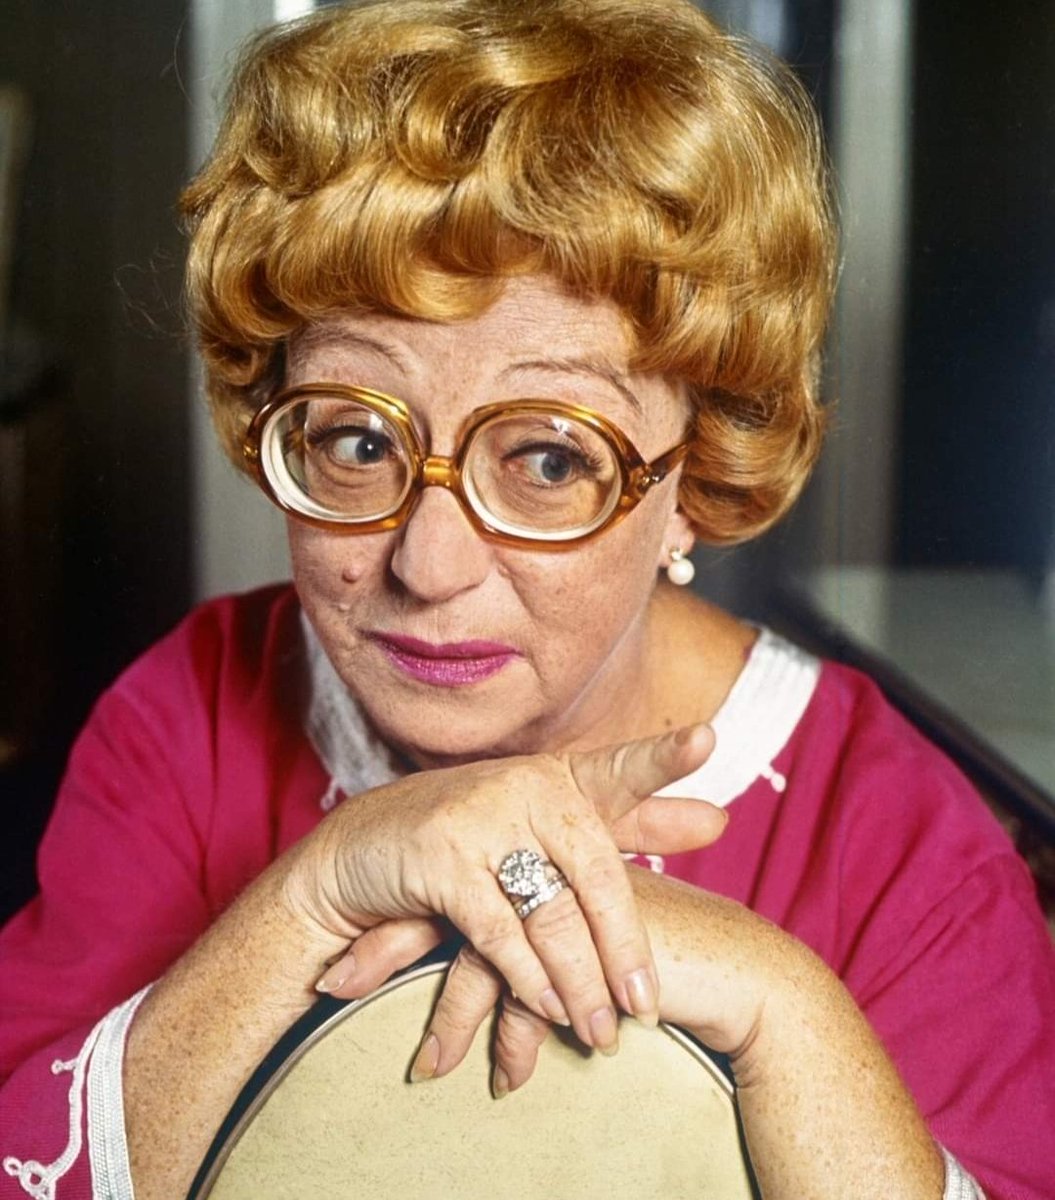 Born on this day in 1911, in the wonderful seaside town of #Morecambe, Thora Hird, actress and for many years much-loved presenter of BBC's Songs of Praise Latterly she lived in the Lancashire village of Slyne-with-Hest with views from her house towards the beautiful bay.